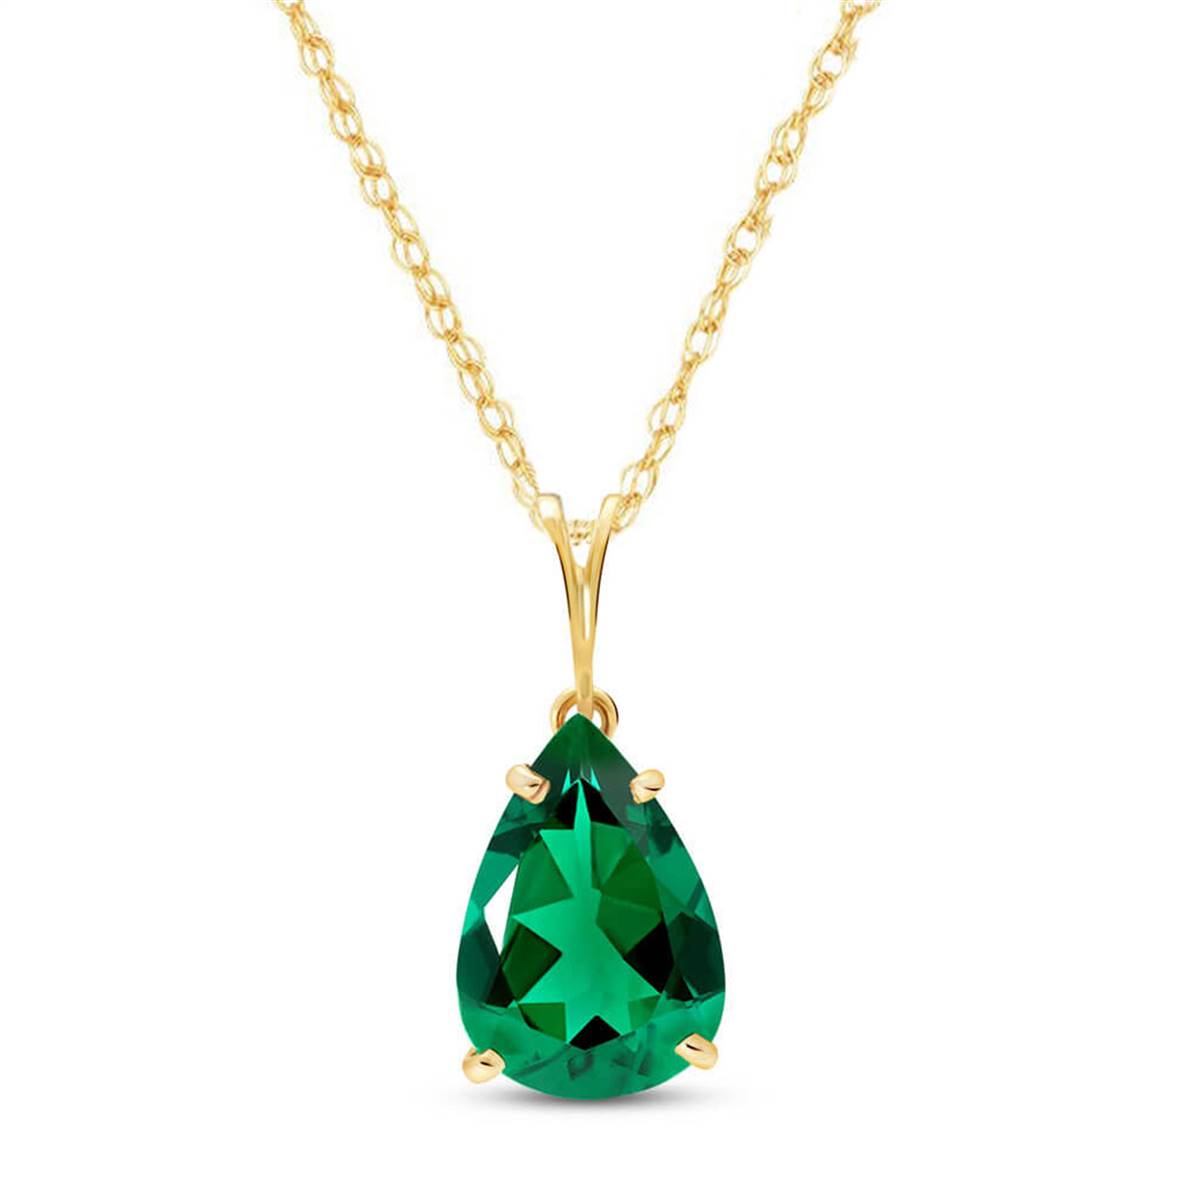 14K Solid Yellow Gold Necklace With Pear Shape 3.00 ctw High Polished Genuine Emerald - Grade AAA